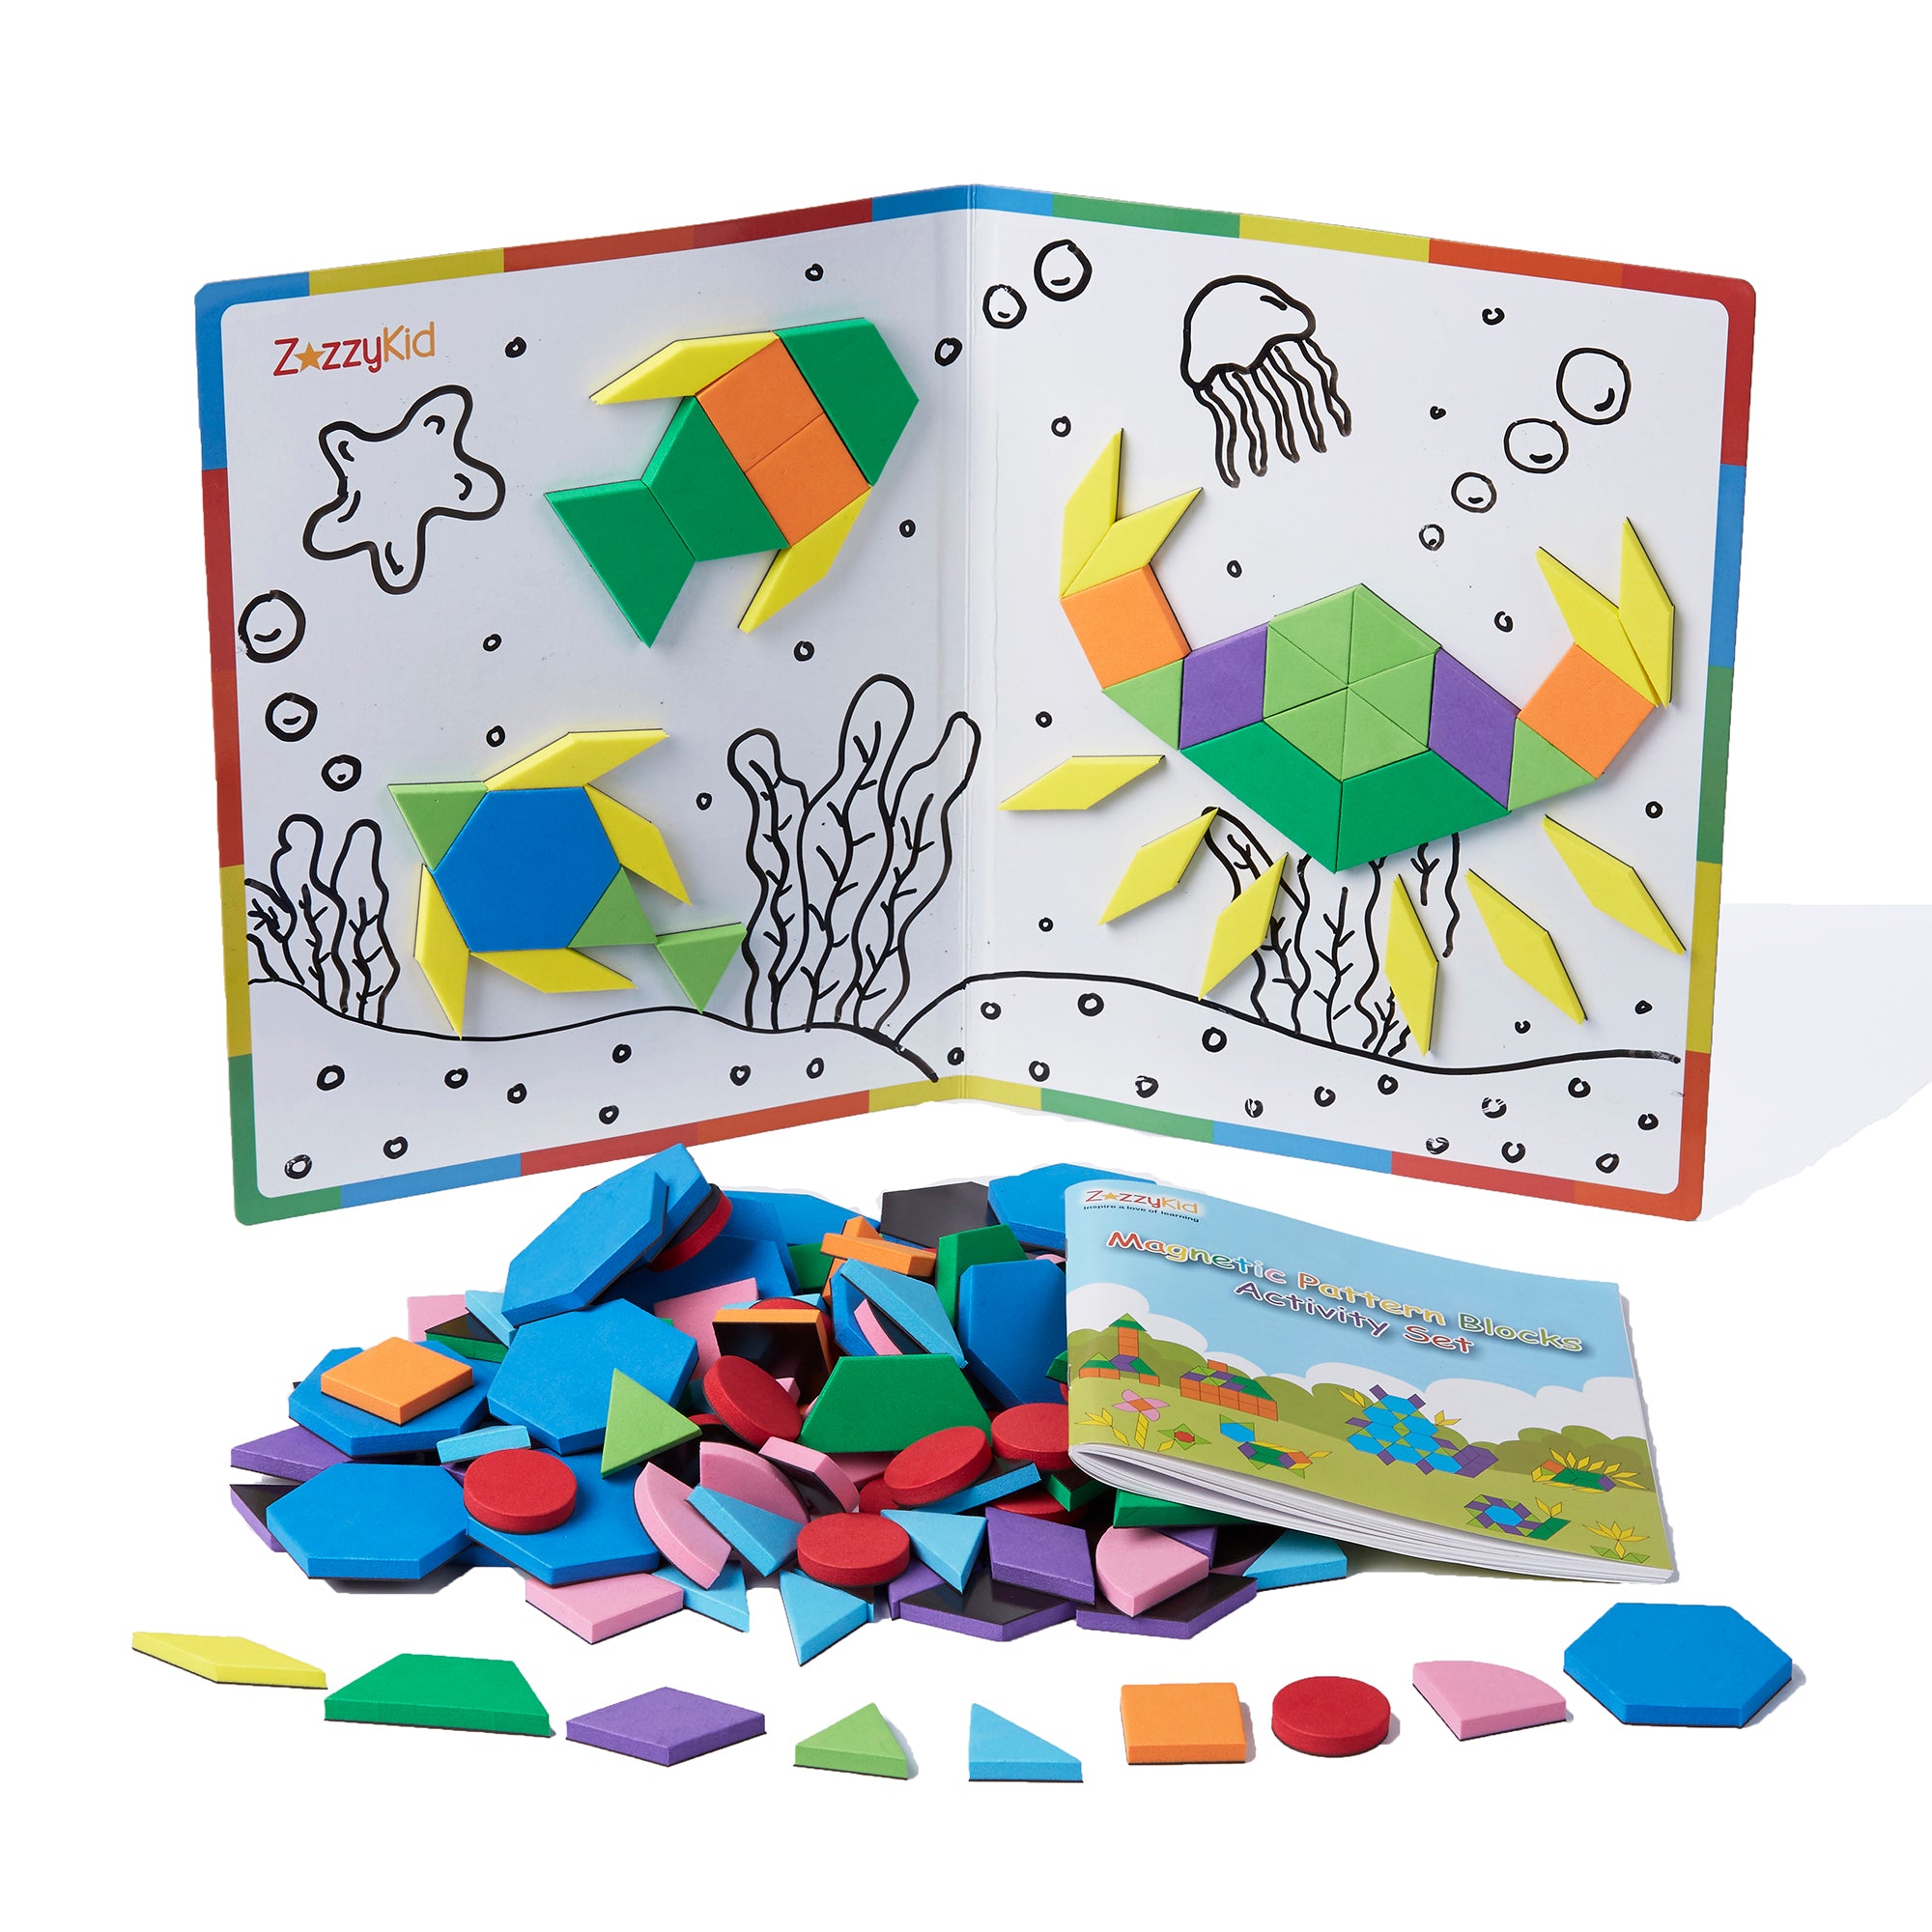 Giant Magnetic Shapes - 47 Pieces